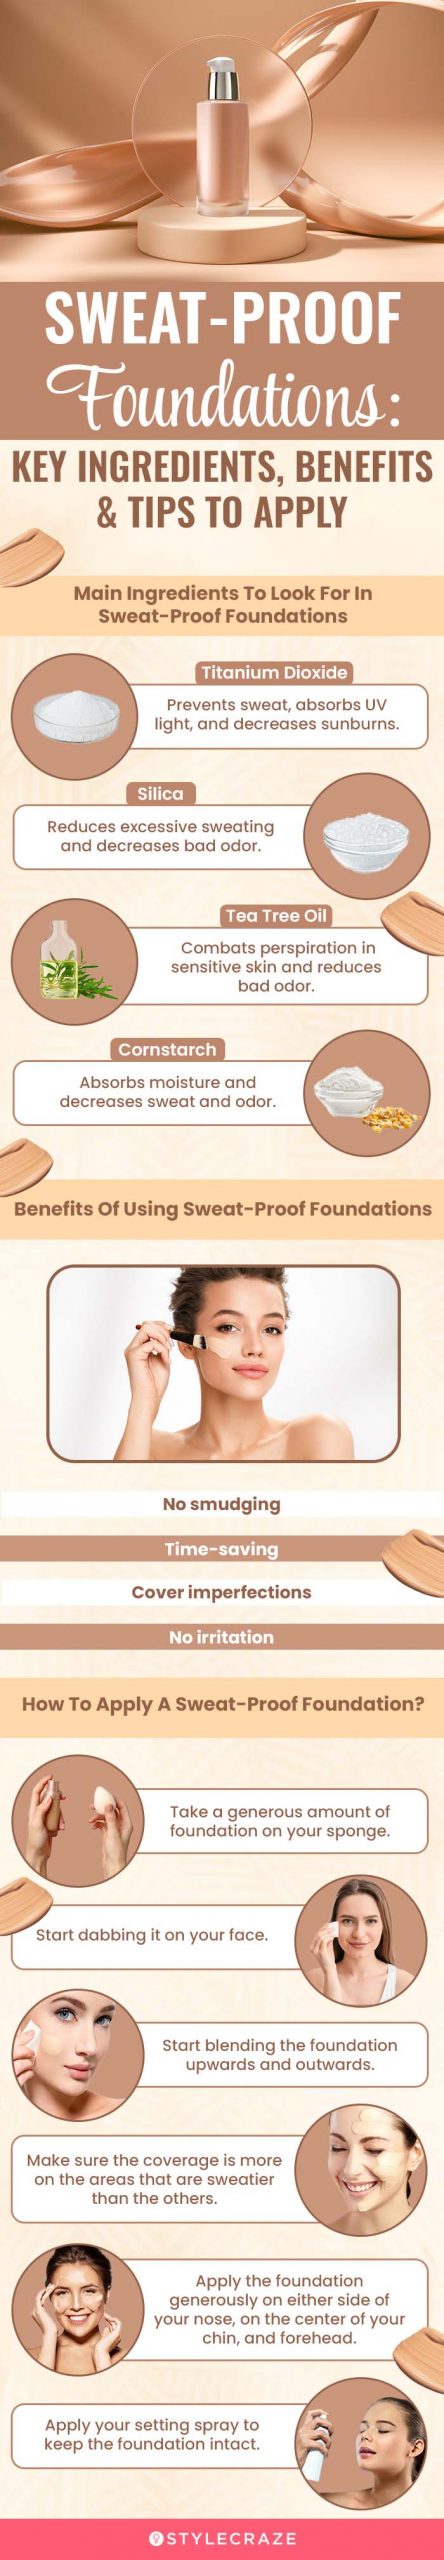 Sweat-Proof Foundations: Key Ingredients, Benefits & Tips (infographic)